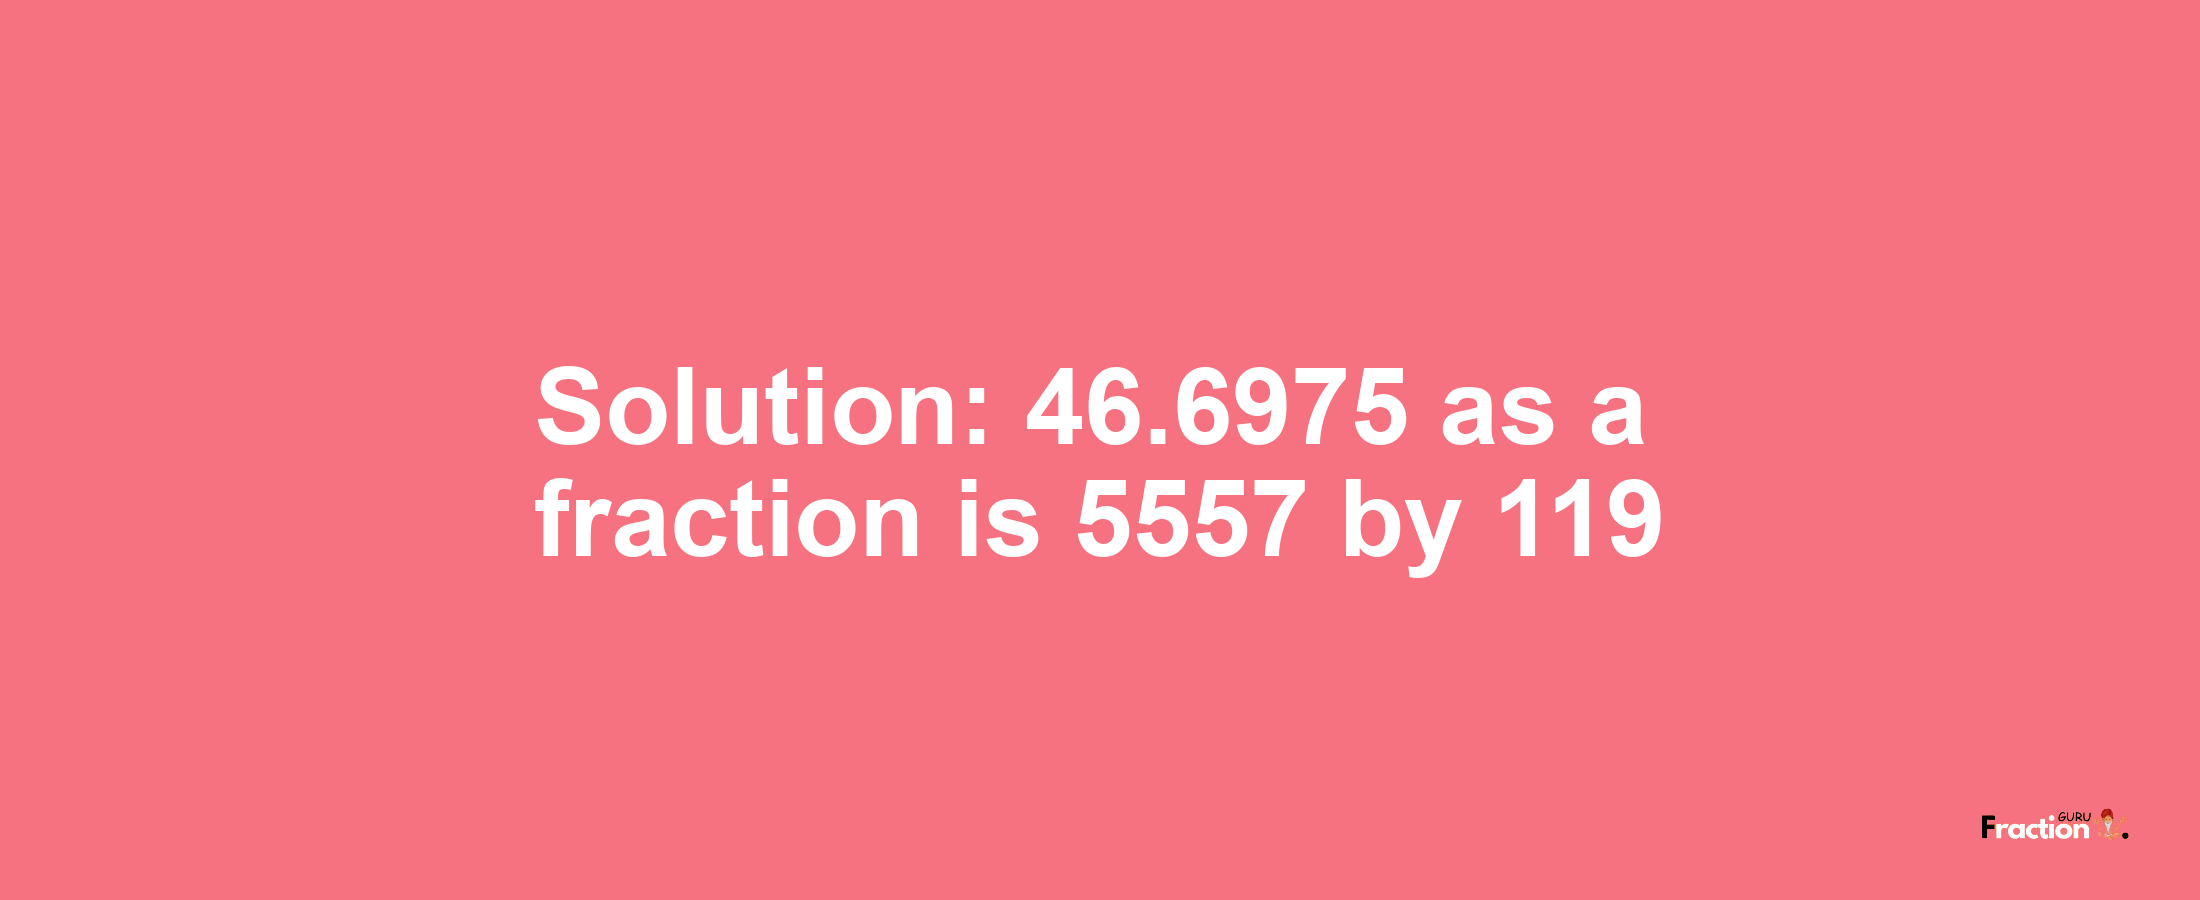 Solution:46.6975 as a fraction is 5557/119